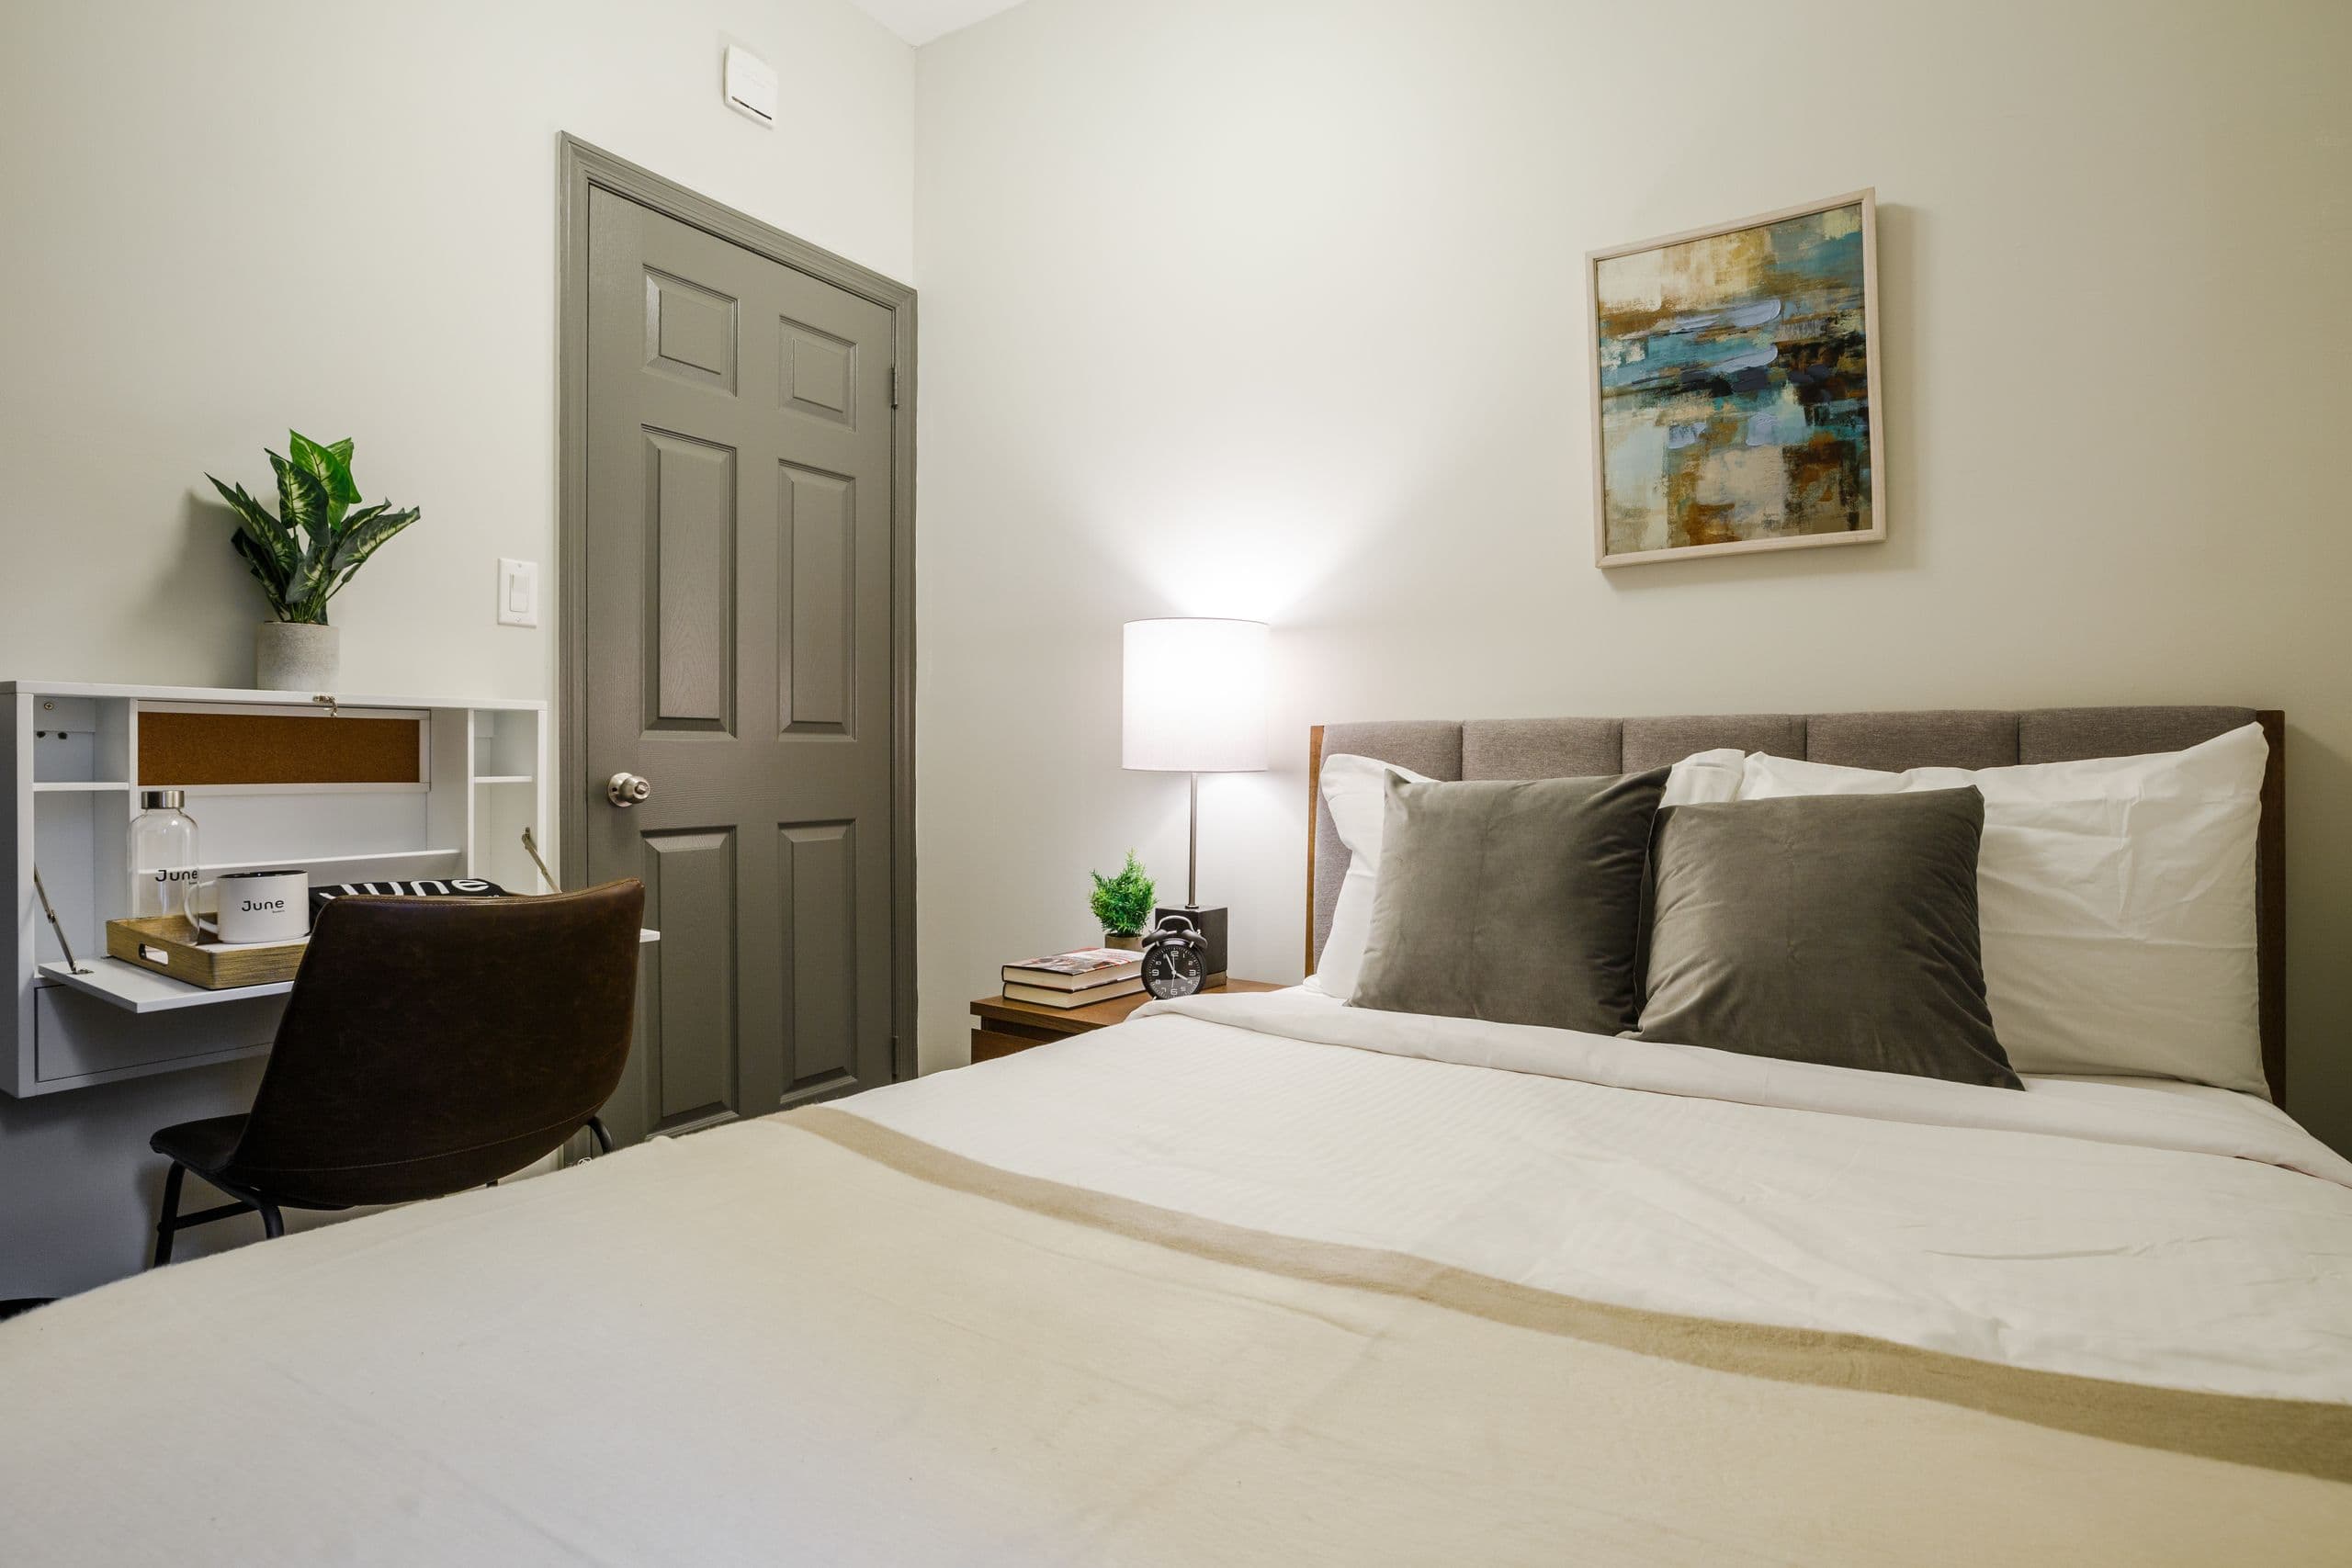 Photo 6 of #441: Twin Bedroom B at June Homes